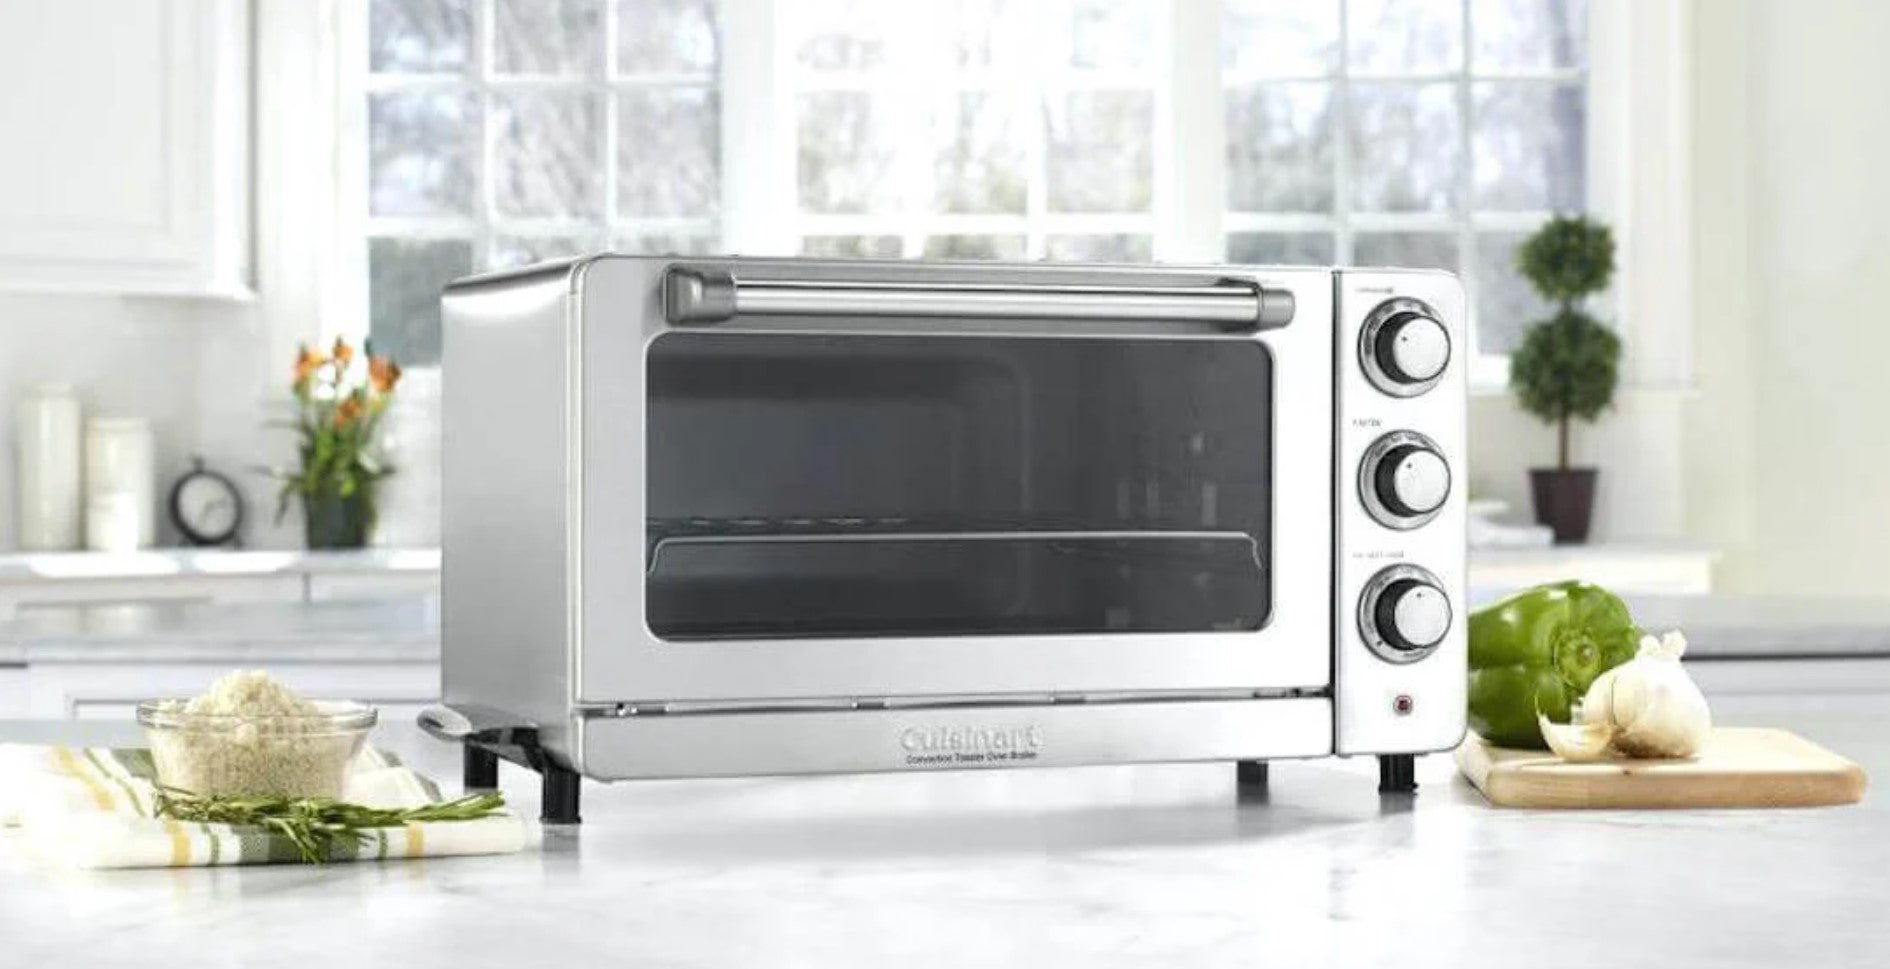 Cuisinart TOB-60N Convection Toaster Oven Broiler Chrome - Certified Refurbished